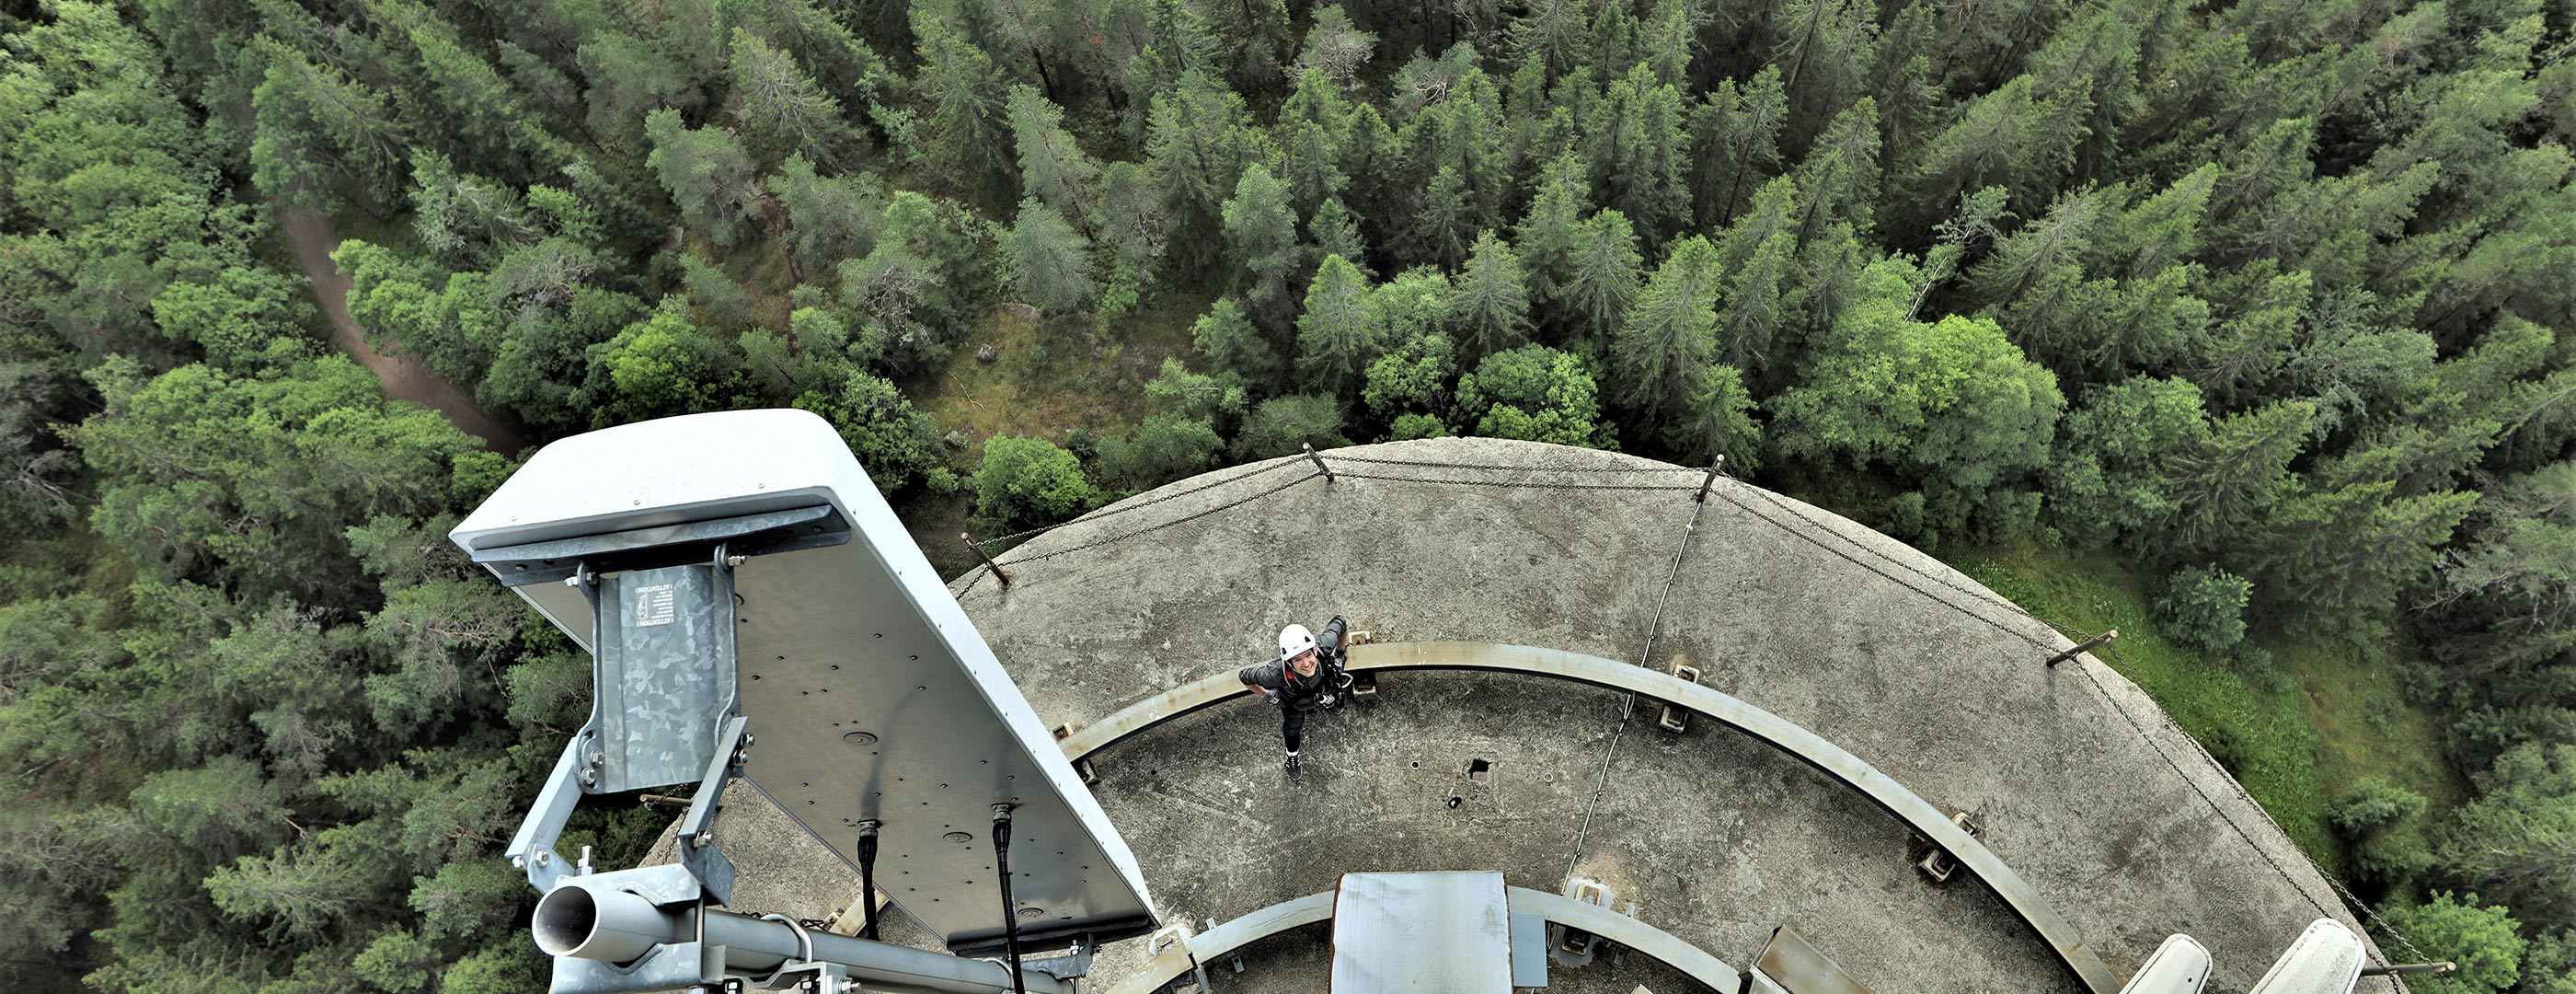 Person at the top of a base station surrounded by trees